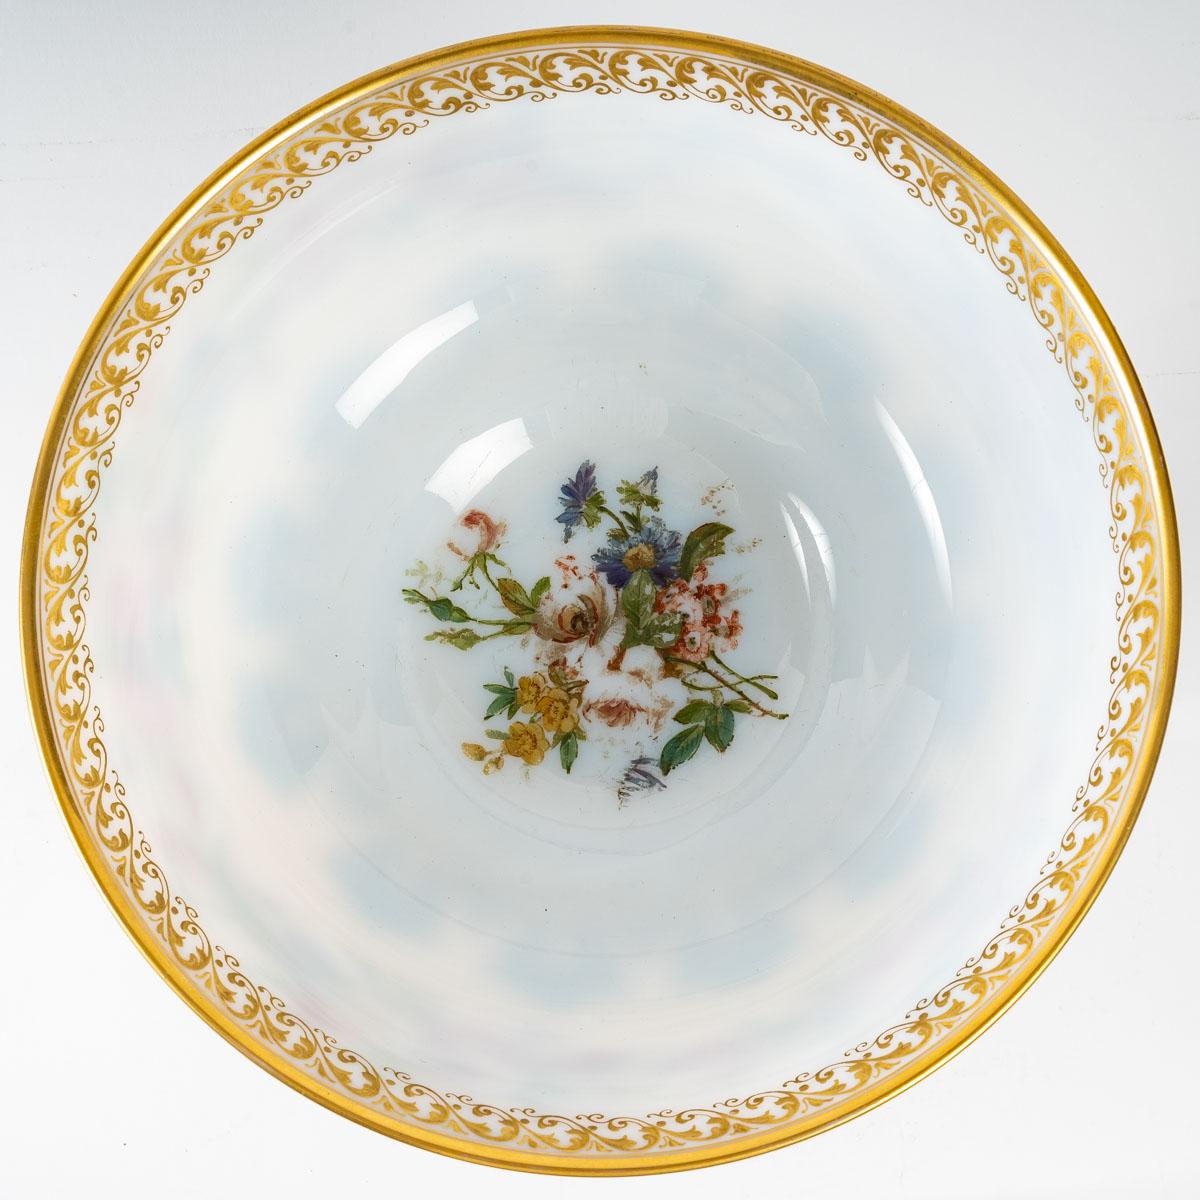 Baccarat Opaline cup, 19th century, Napoleon III period, very beautiful flower decorations.
Measures: H: 25 cm, D: 25 cm.